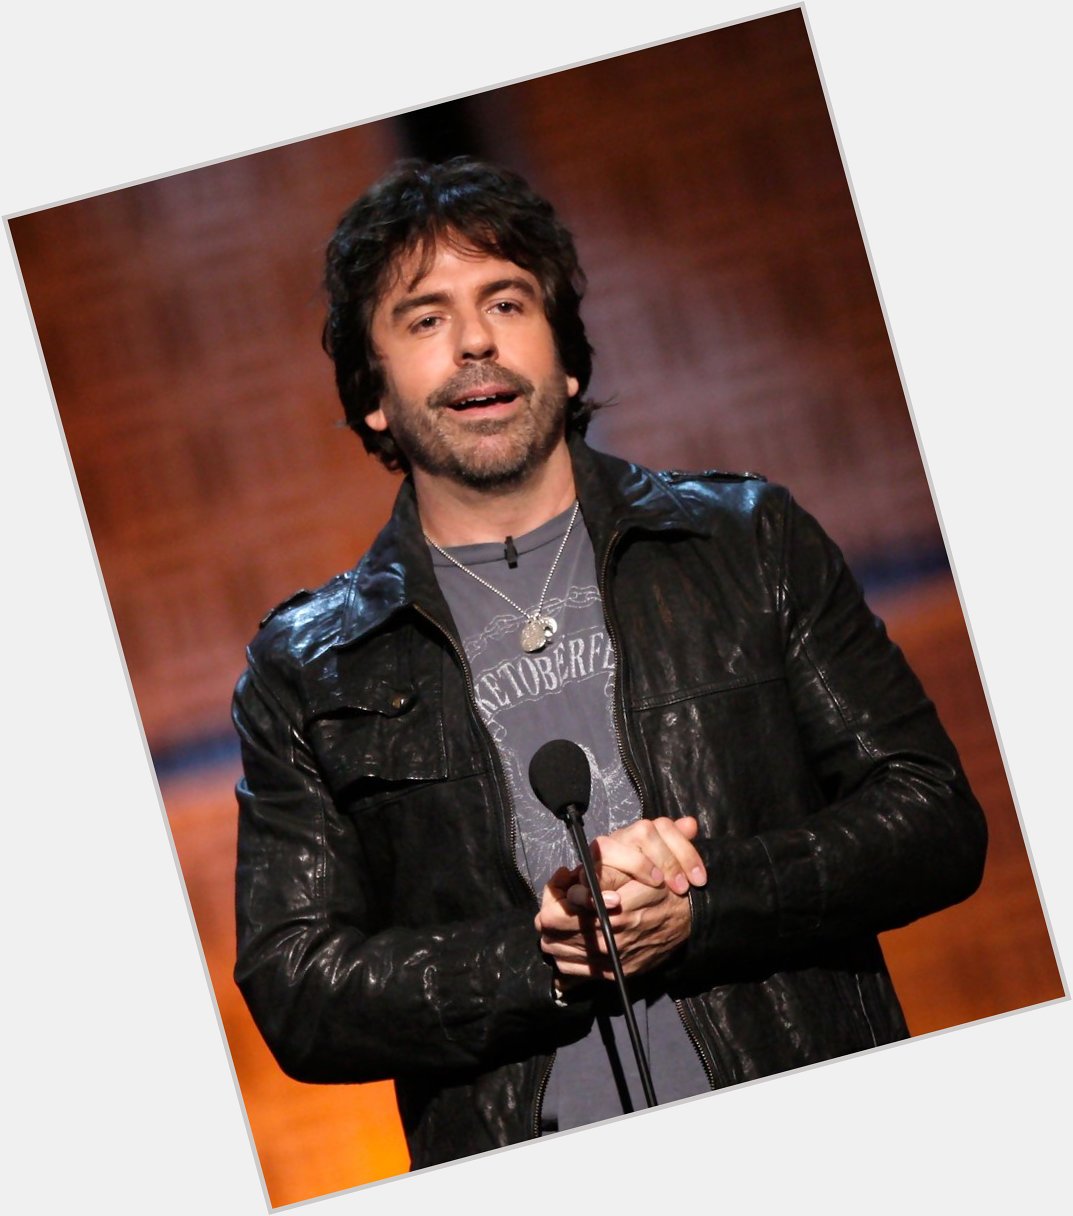 Happy Birthday to Greg Giraldo, who would have turned 52 today! 